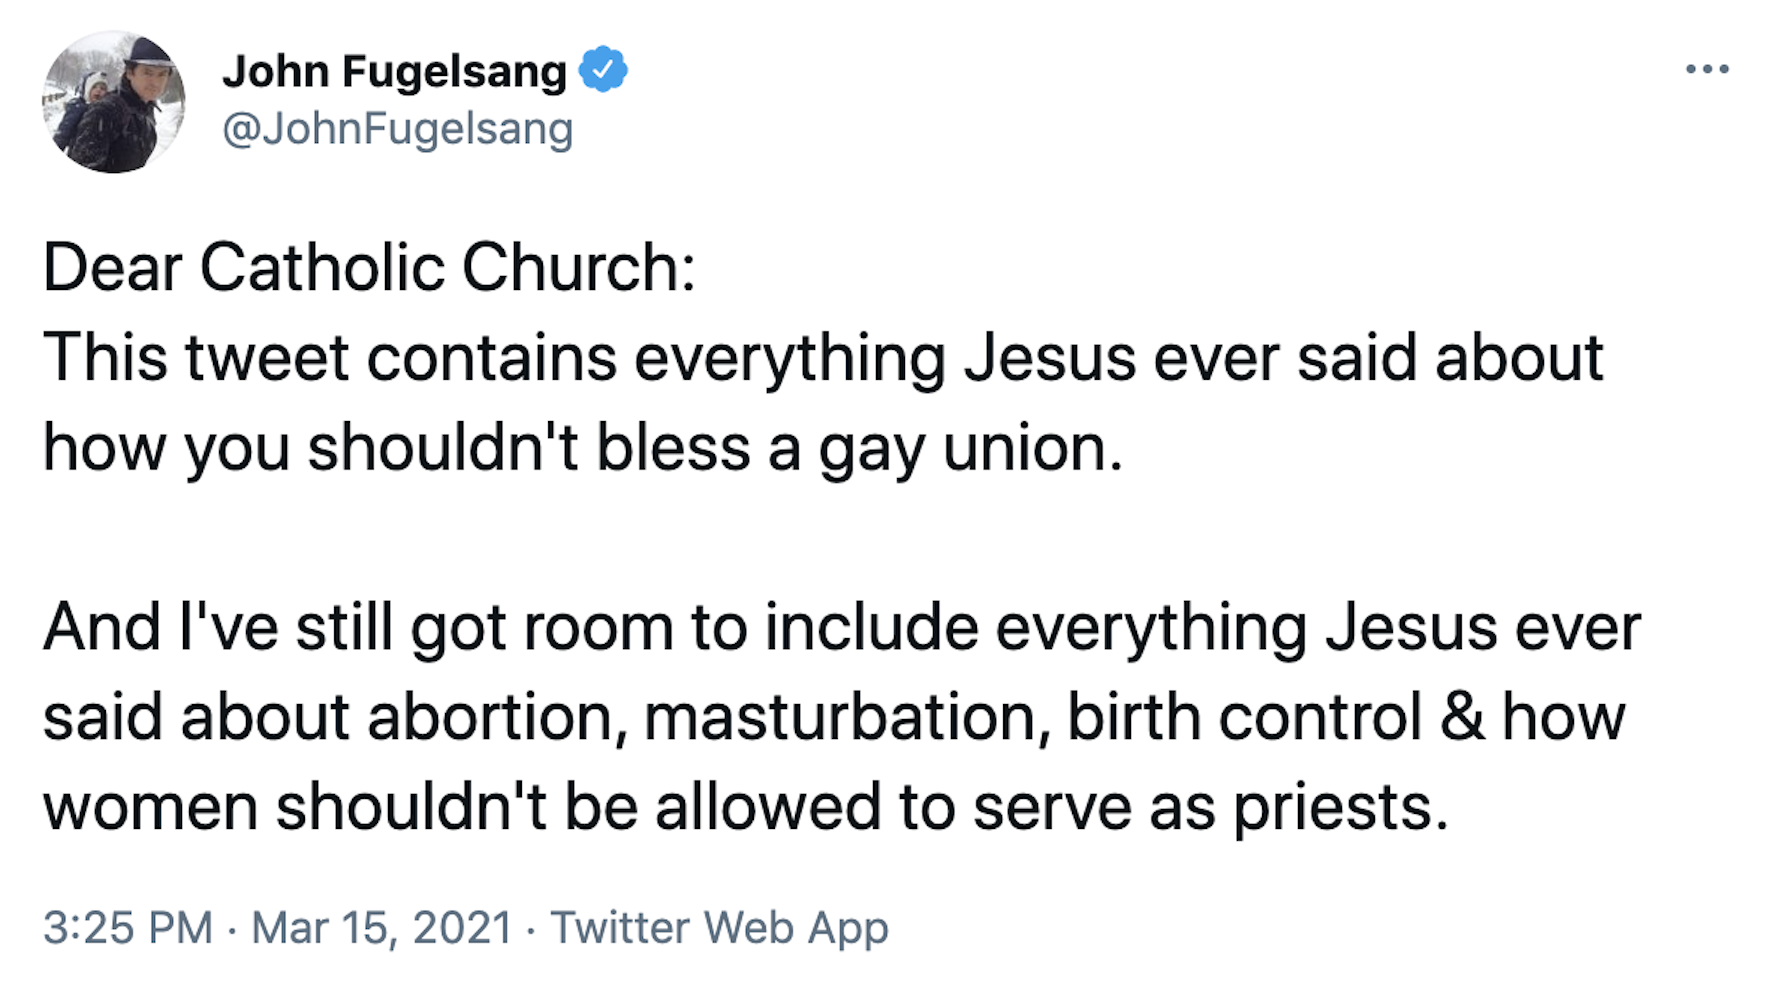 Dear Catholic Church: This tweet contains everything Jesus ever said about how you shouldn't bless a gay union.  And I've still got room to include everything Jesus ever said about abortion, masturbation, birth control & how women shouldn't be allowed to serve as priests.